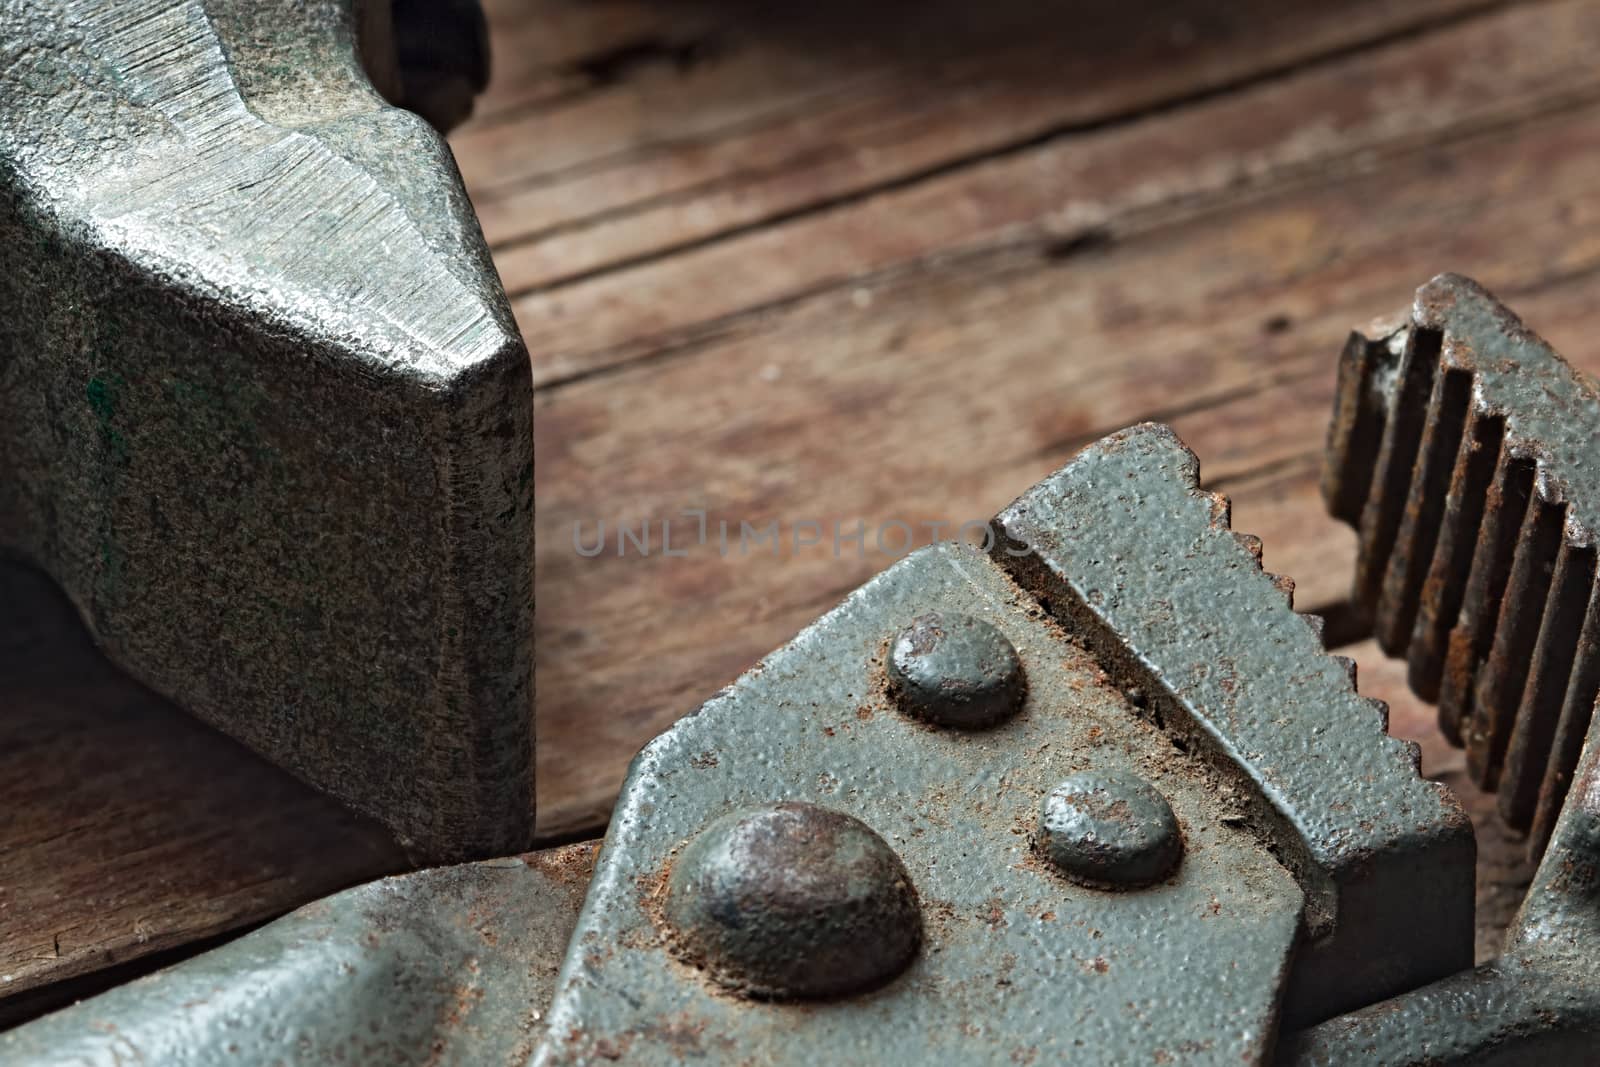 Adjustable wrench and a hammer on a rough wooden background. Still life: old tools with traces of use and rust. Close up selective focus image with copy-space.